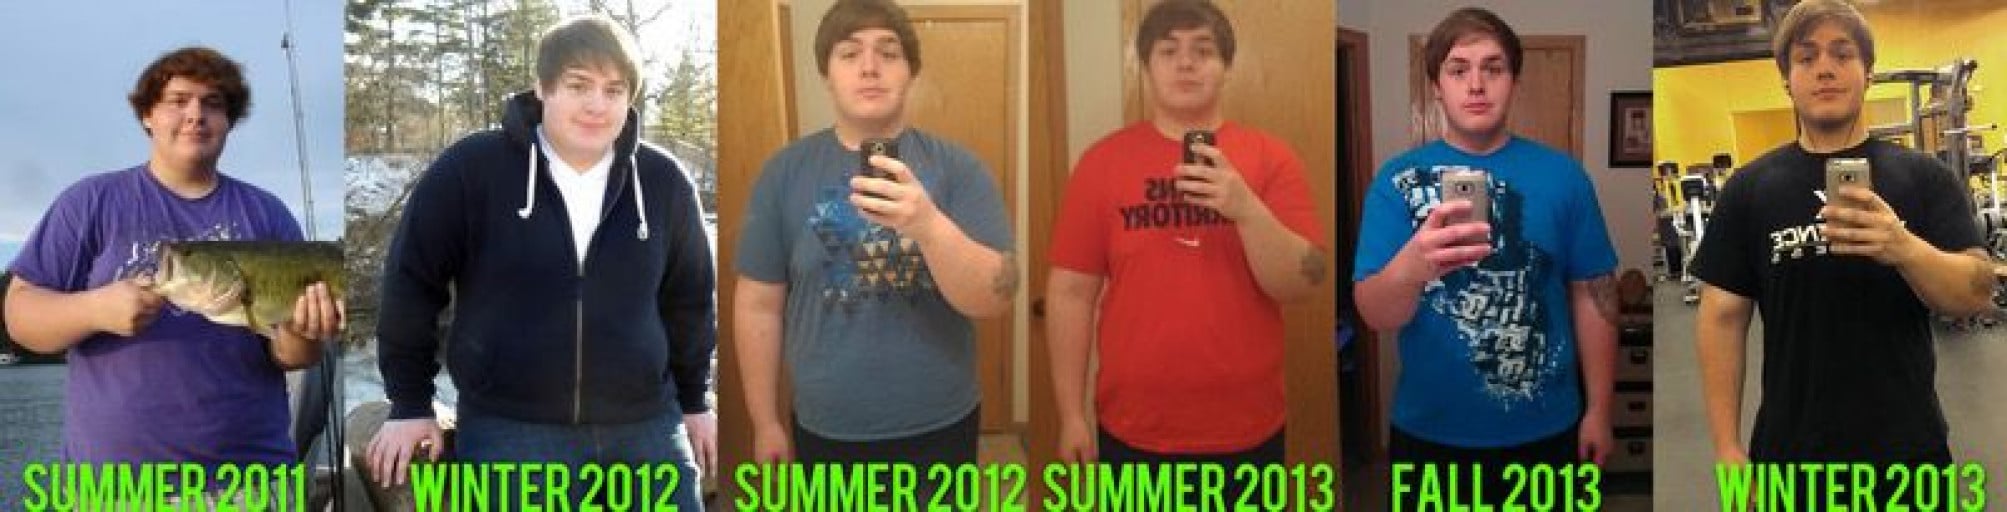 A before and after photo of a 6'0" male showing a weight reduction from 334 pounds to 249 pounds. A total loss of 85 pounds.